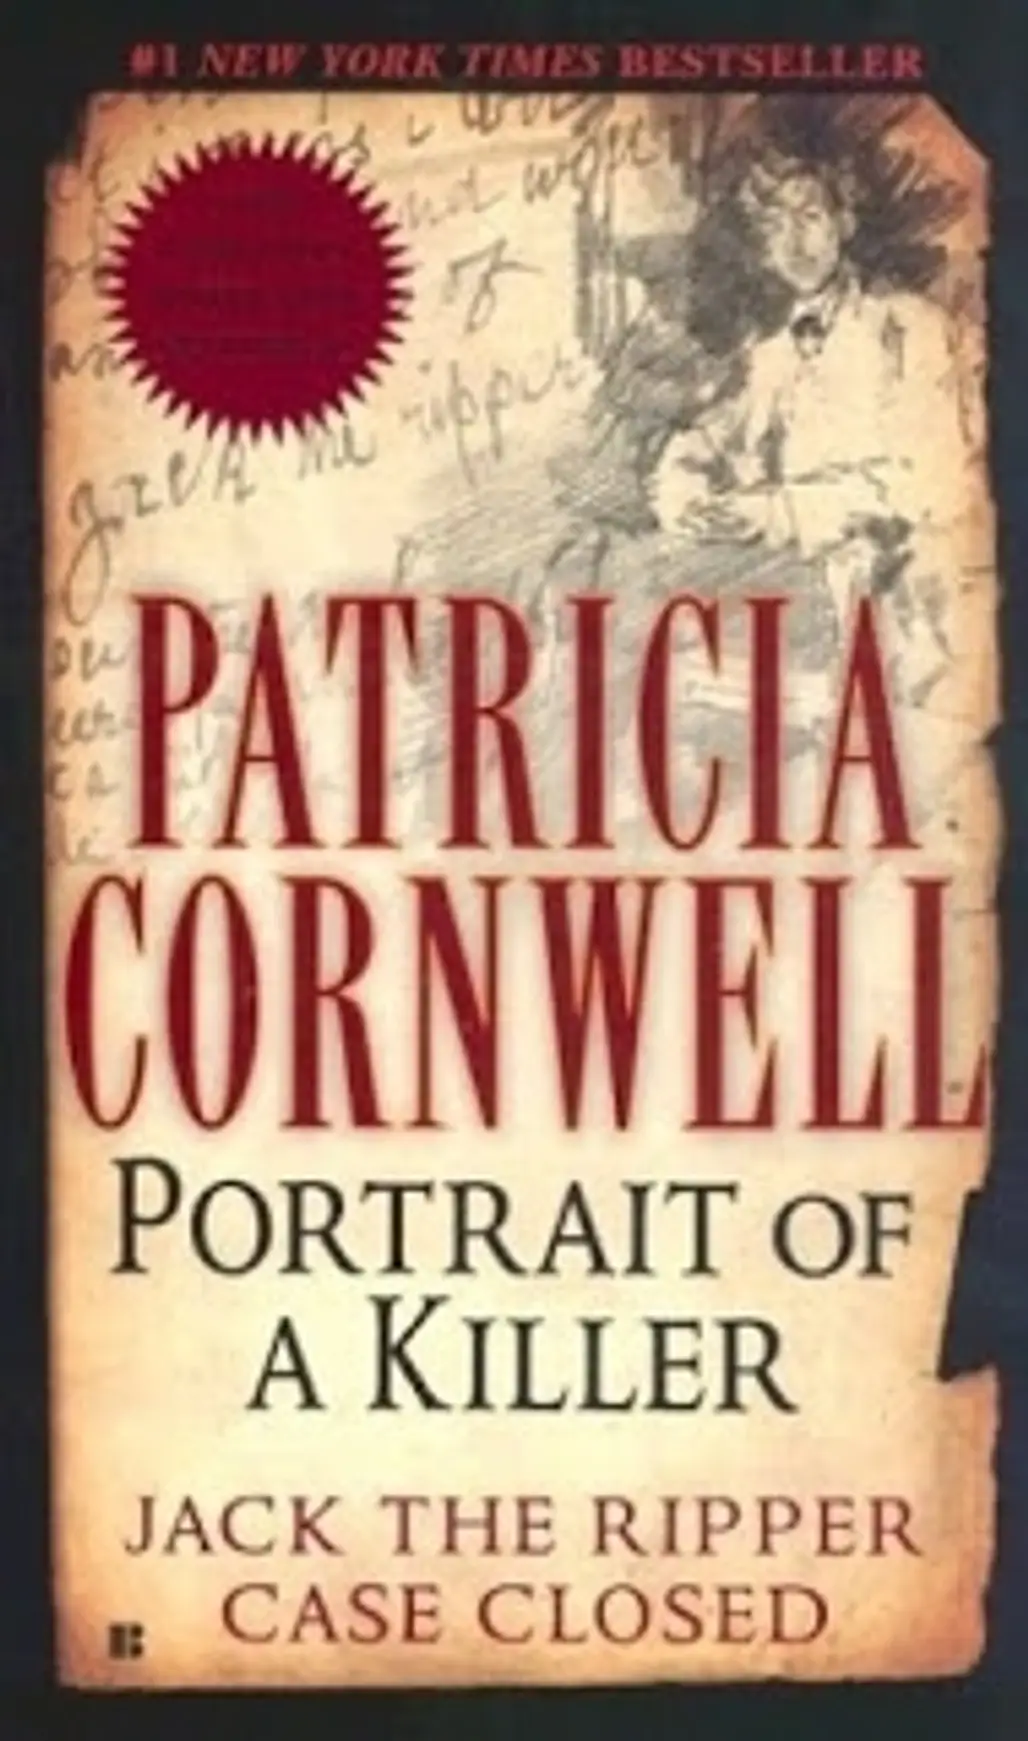 Portrait of a Killer: Jack the Ripper – Case Closed by Patricia Cornwell